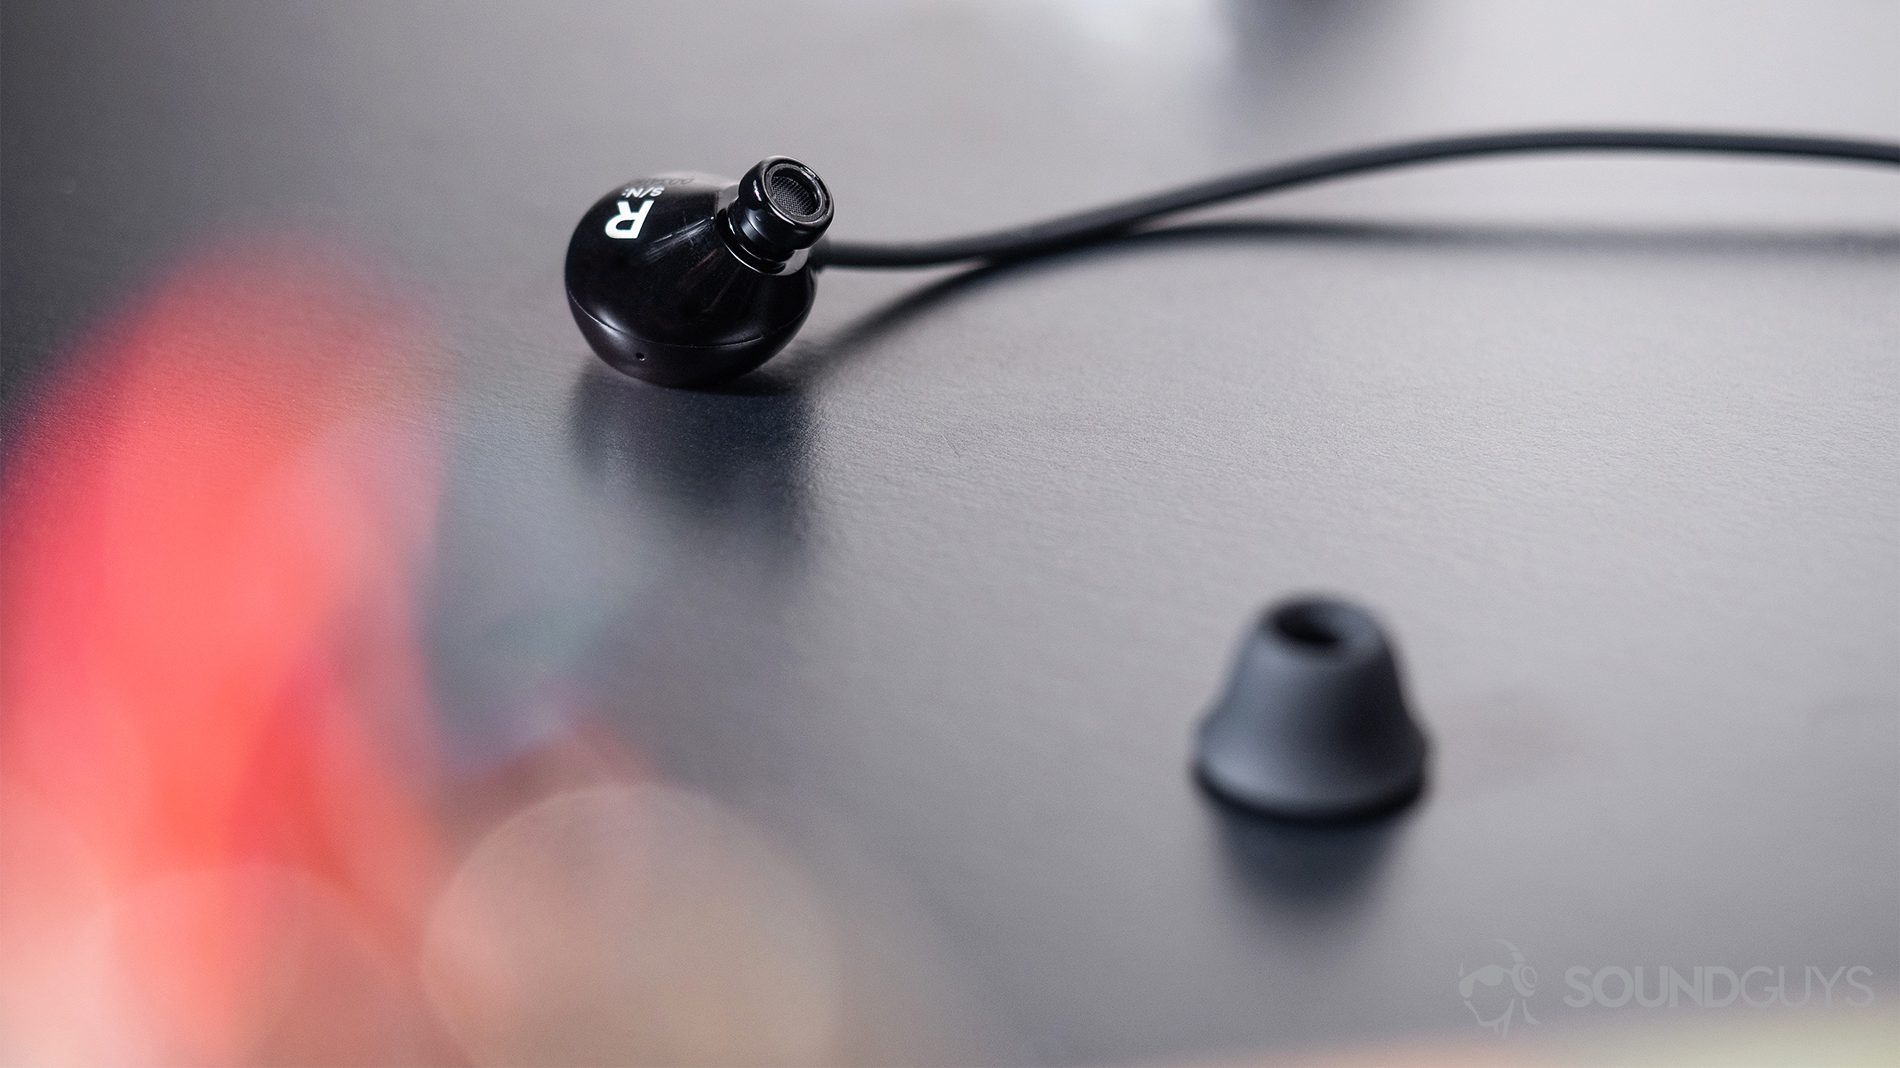 Beyerdynamic Blue Byrd: The earbuds on a black surface with a blurred out red spot on the bottom-left corner of the image.